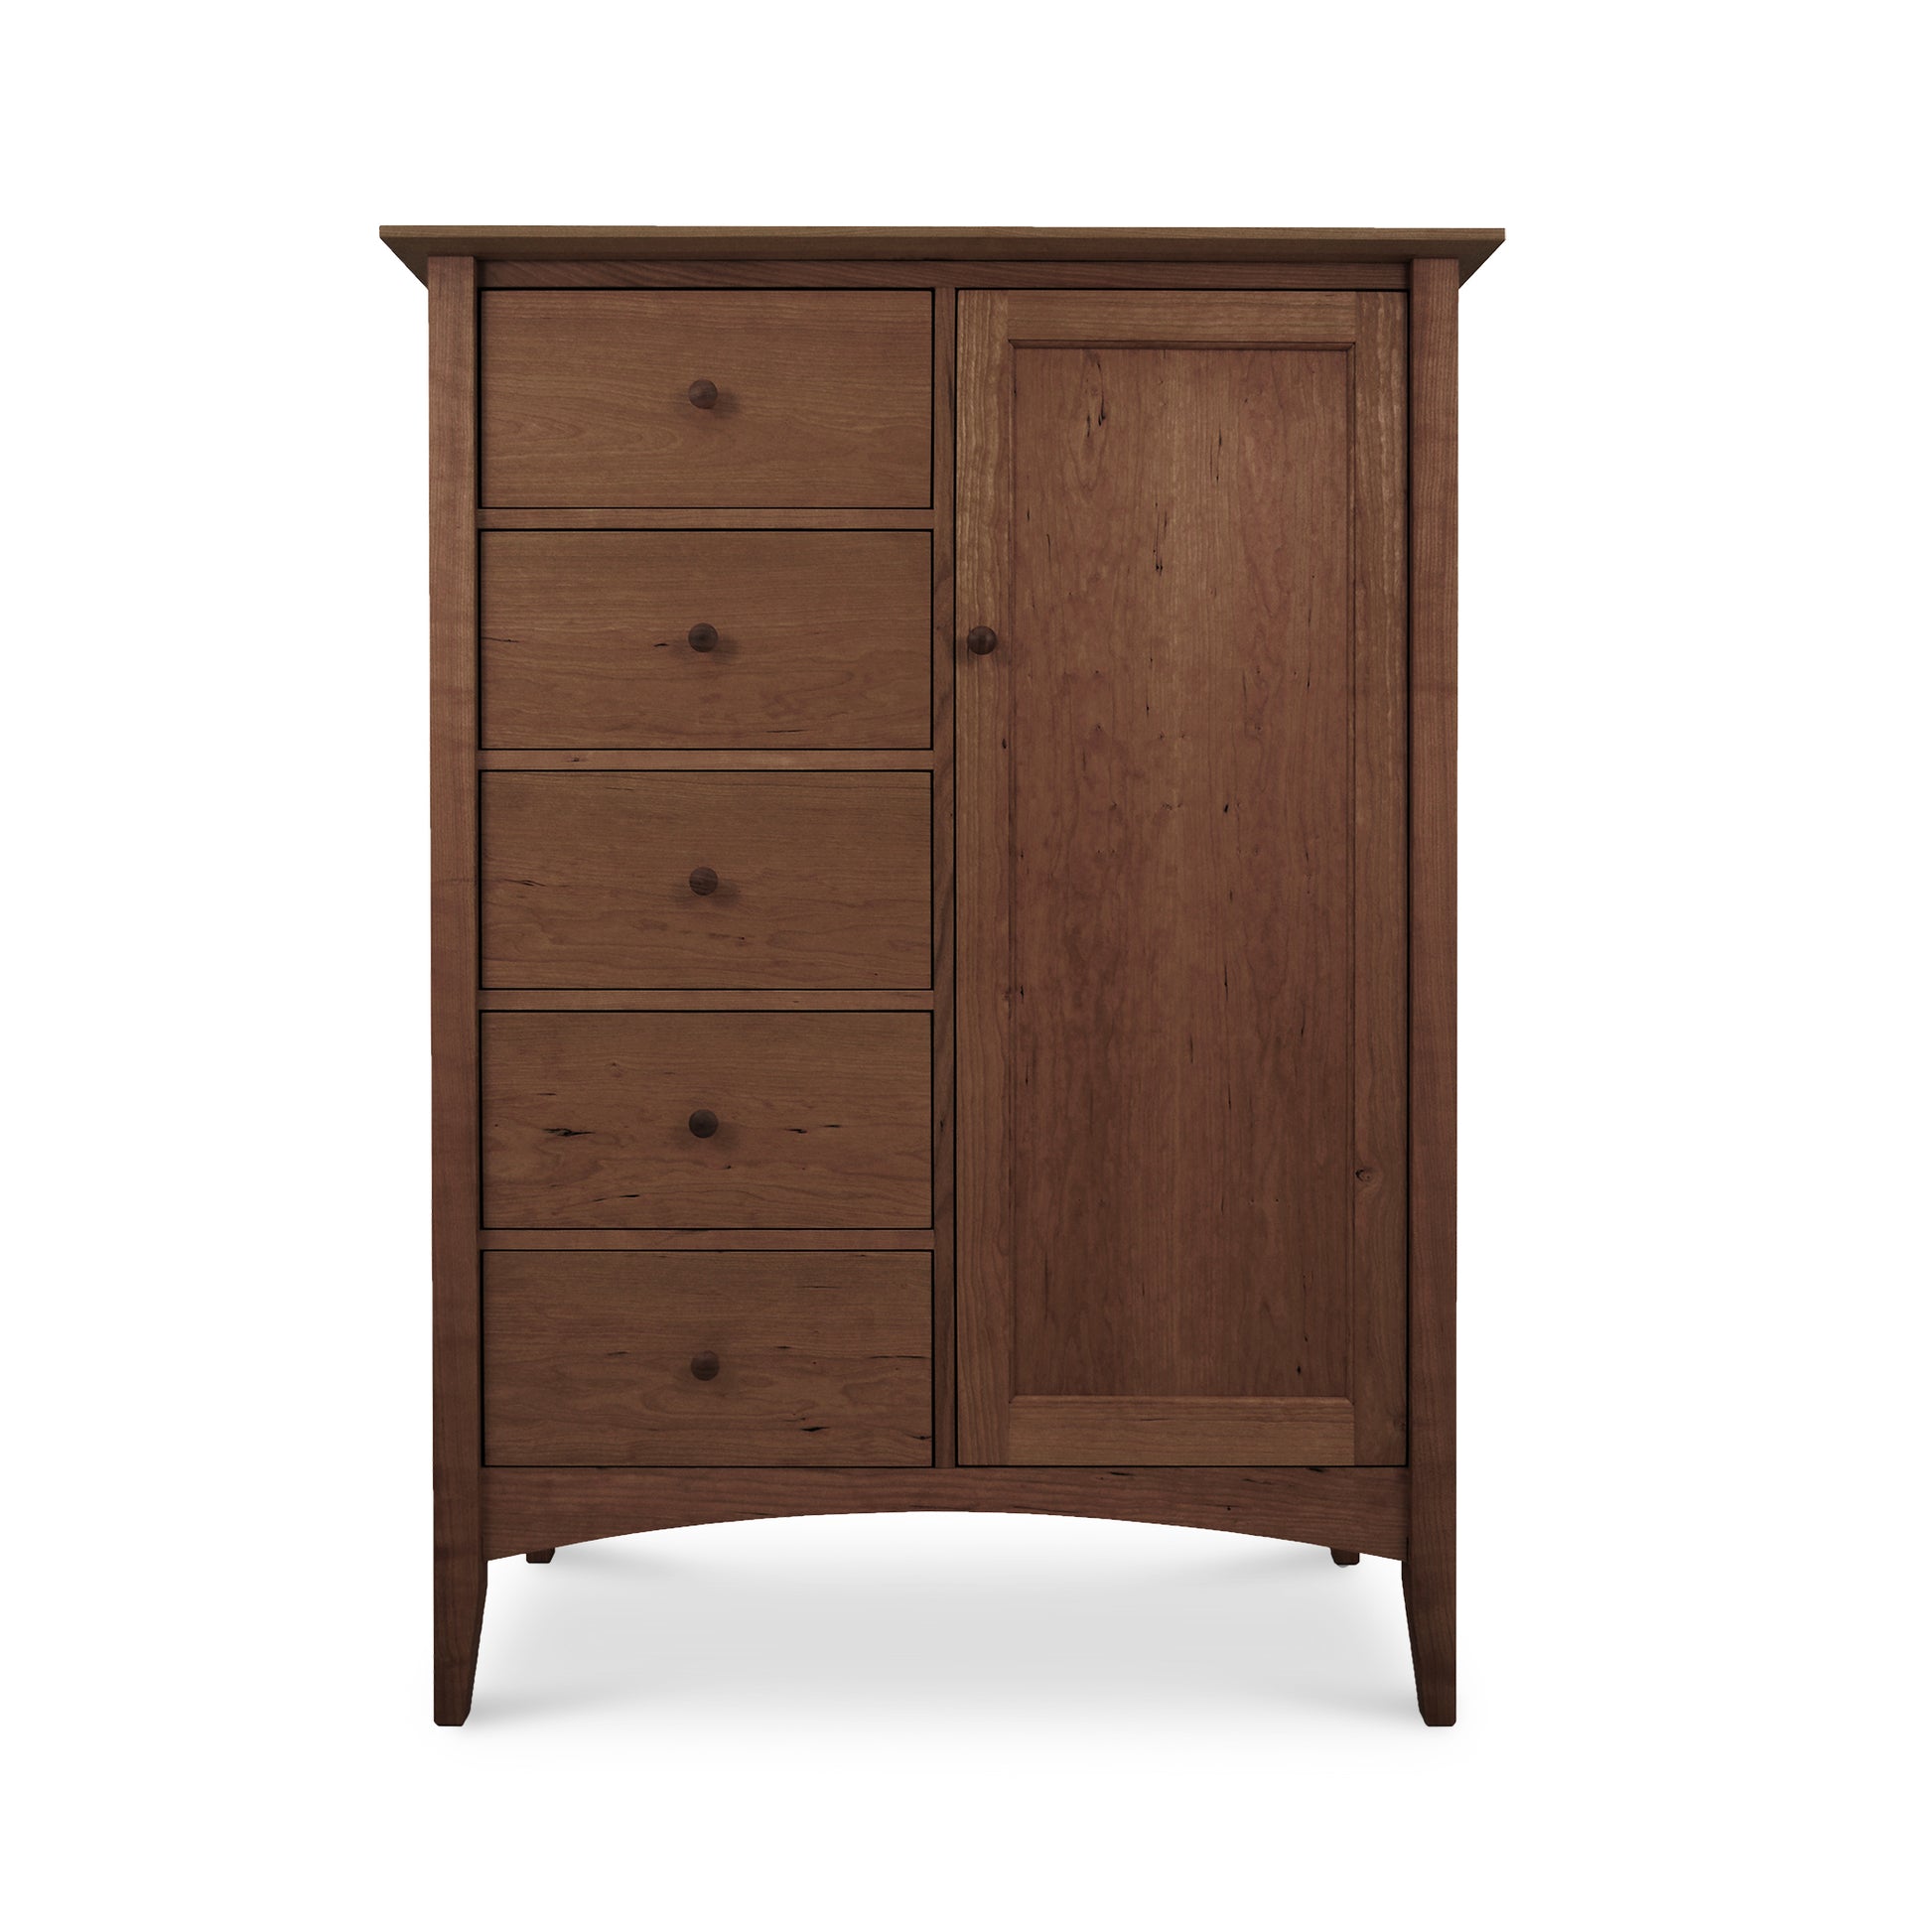 An image of a Maple Corner Woodworks American Shaker Sweater Chest with drawers.